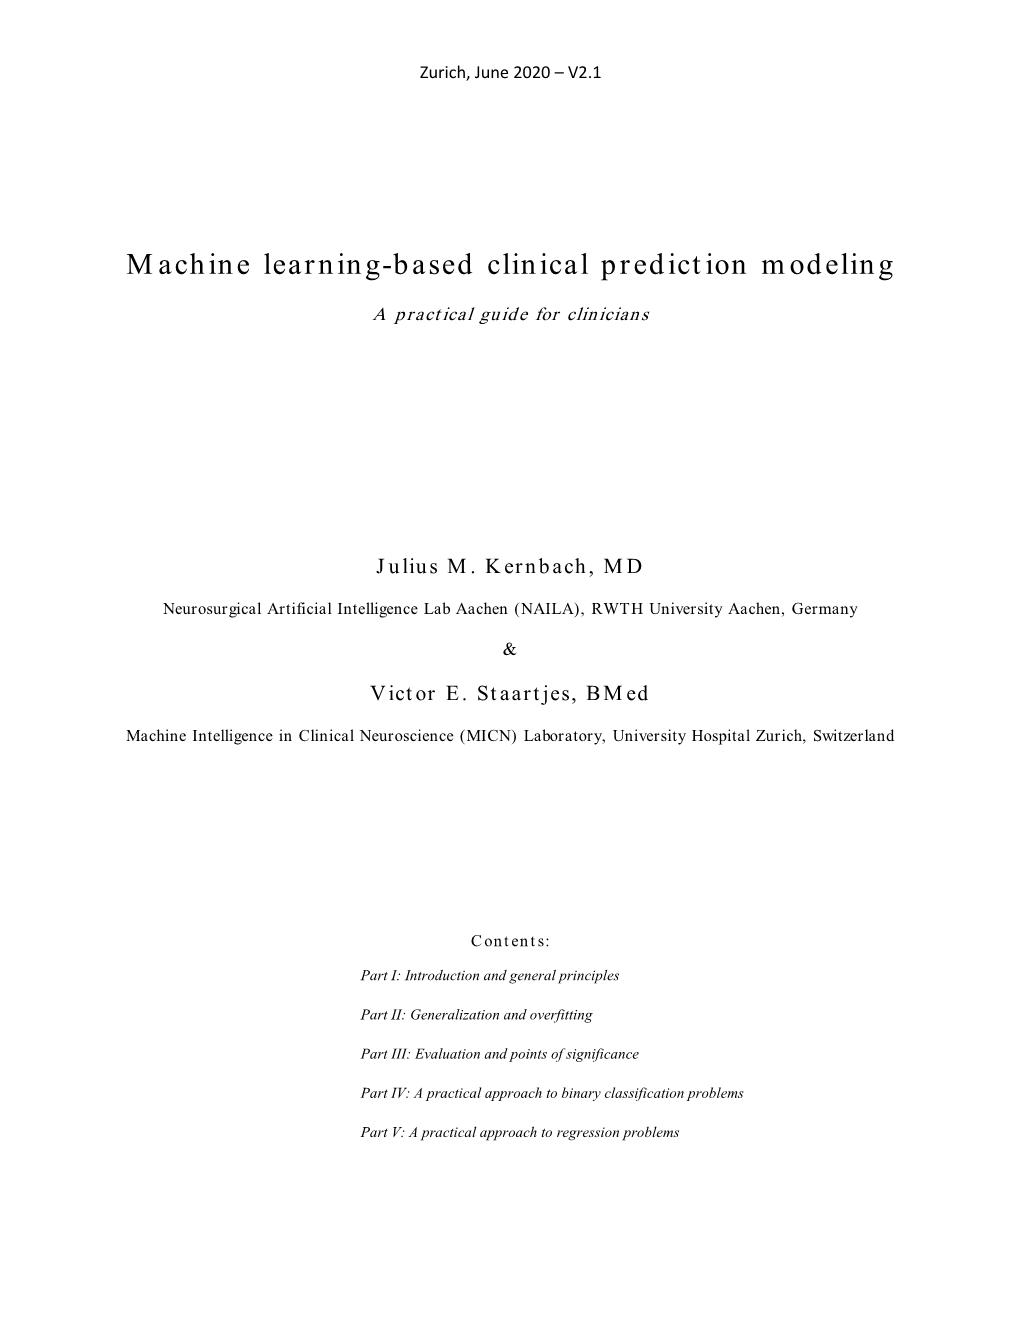 Machine Learning-Based Clinical Prediction Modeling